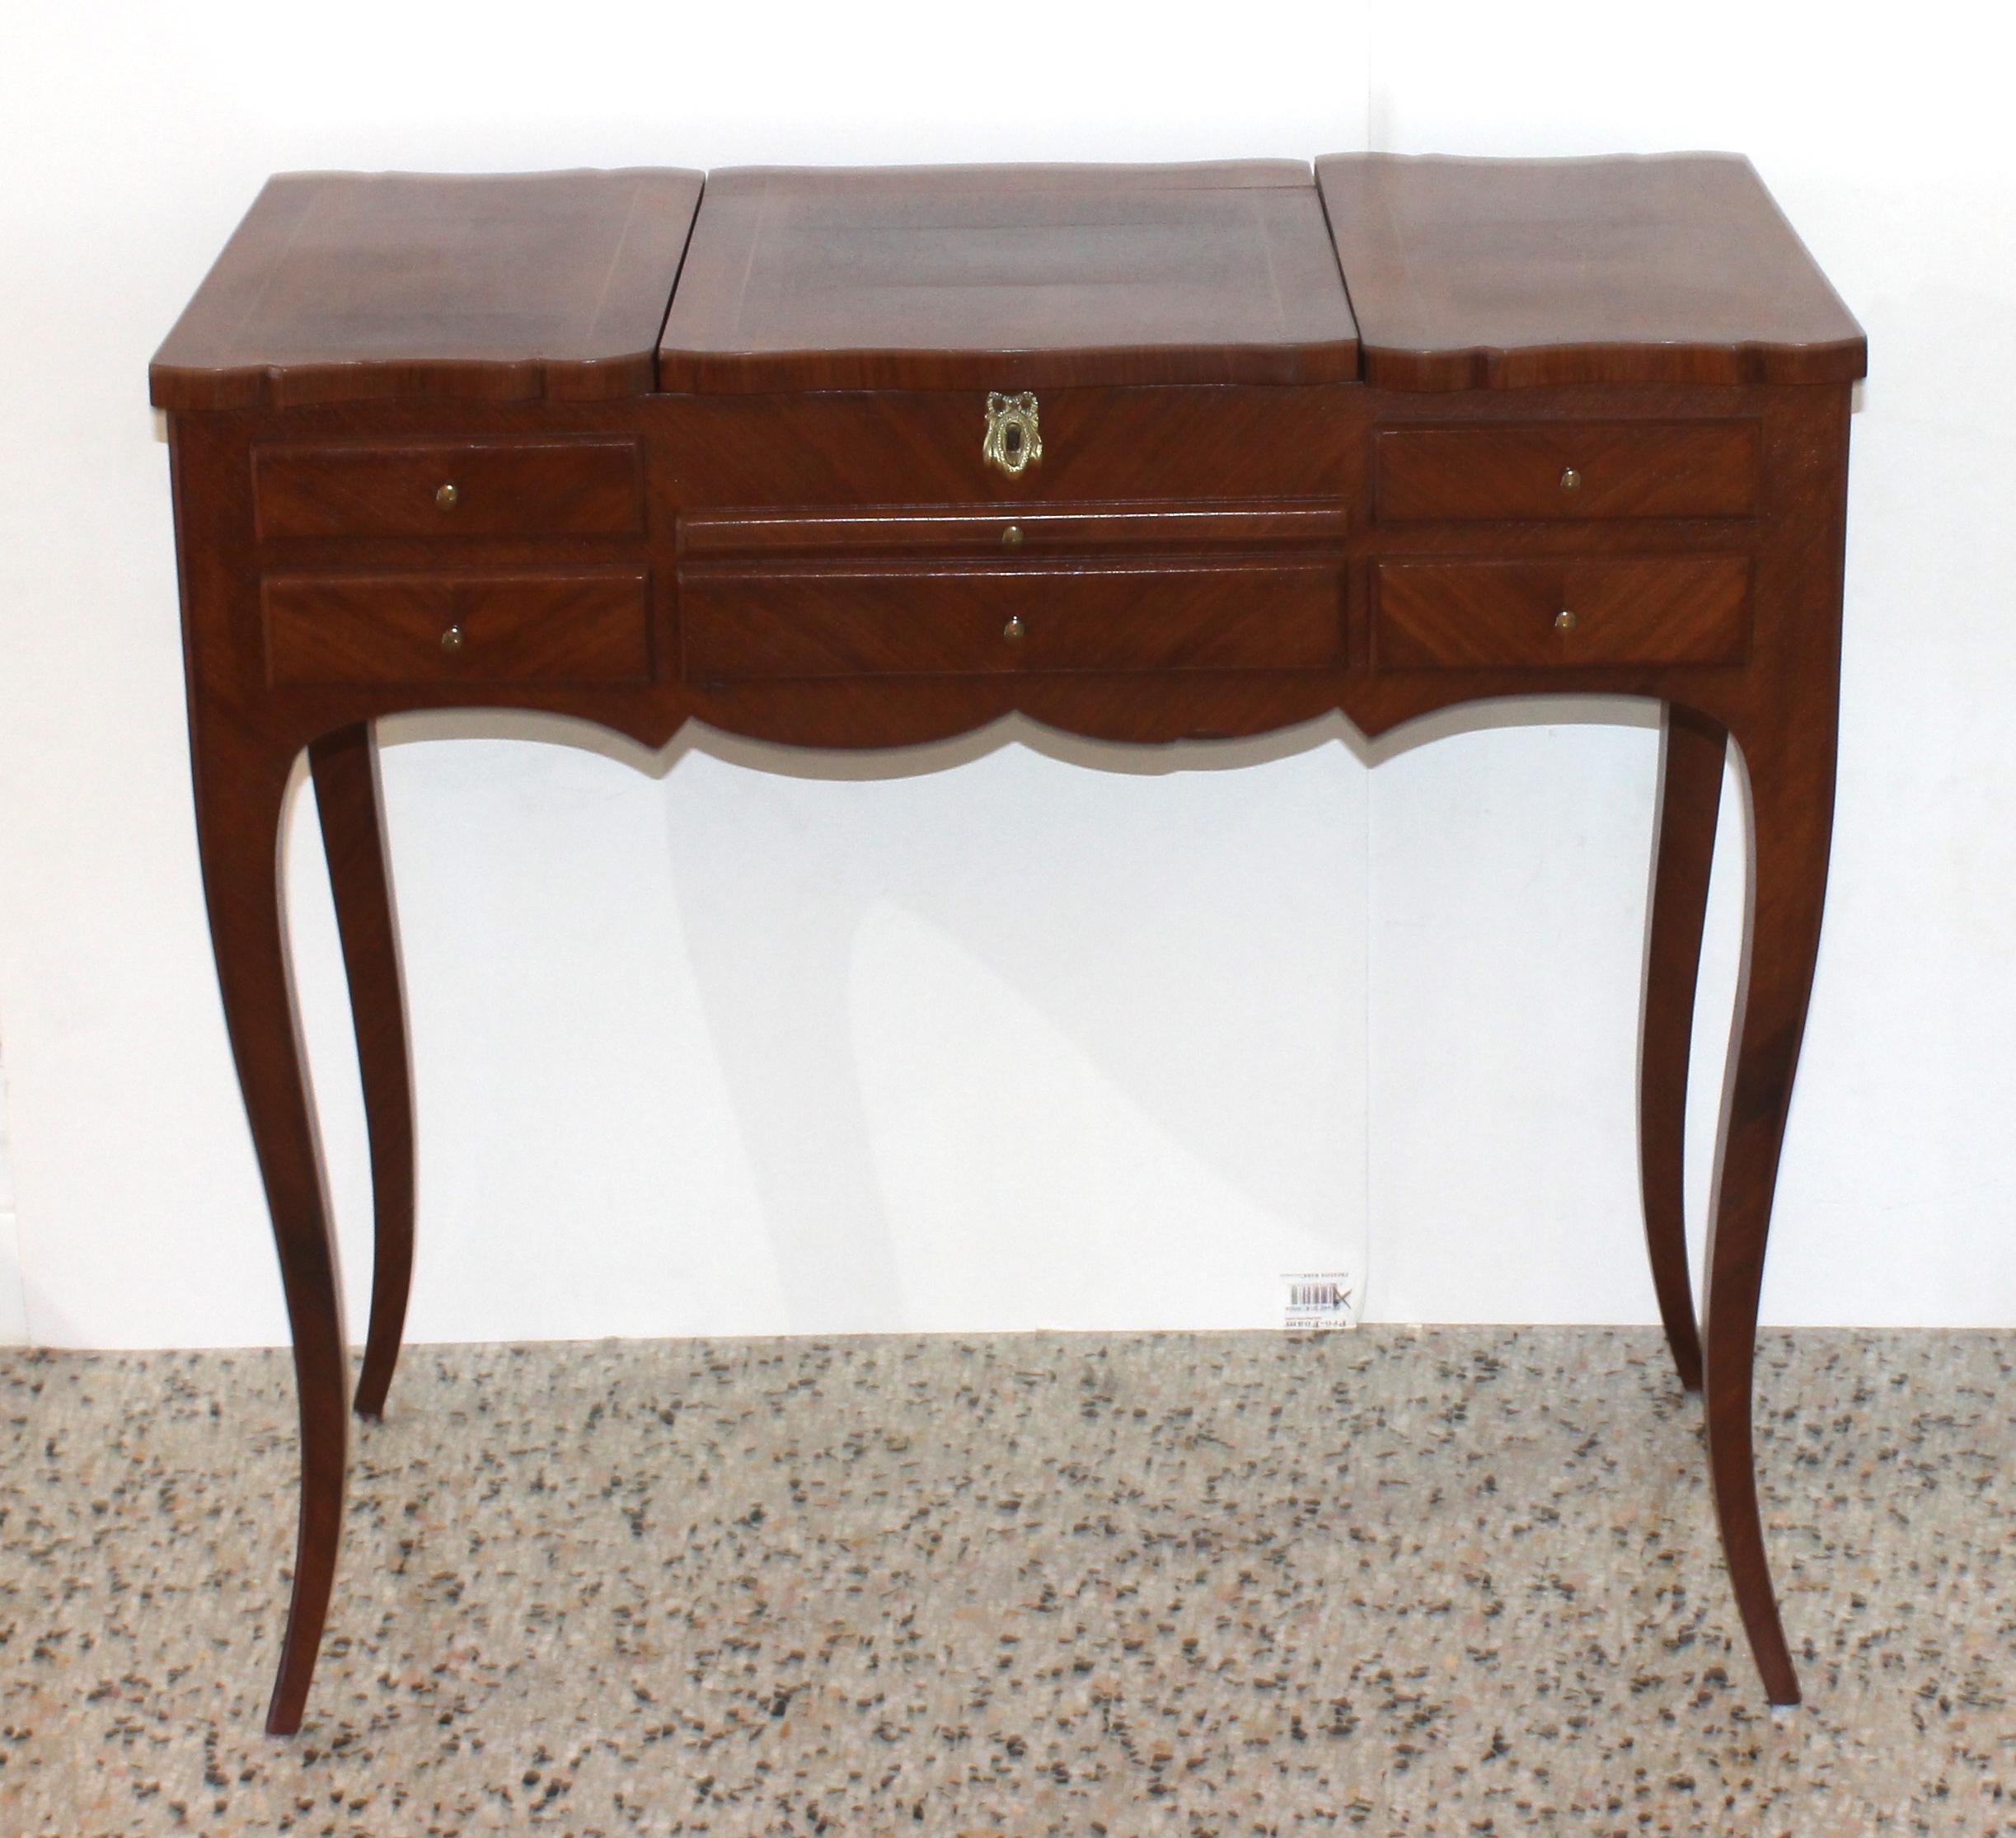 This stylish and chic dressing table is in the Louis XV style, and was fabricated sometime in the 1920s-1930s. The center opens up to reveal a dressing mirror, and just beneath that is a pull-out tray and single drawer. And to the left and right of